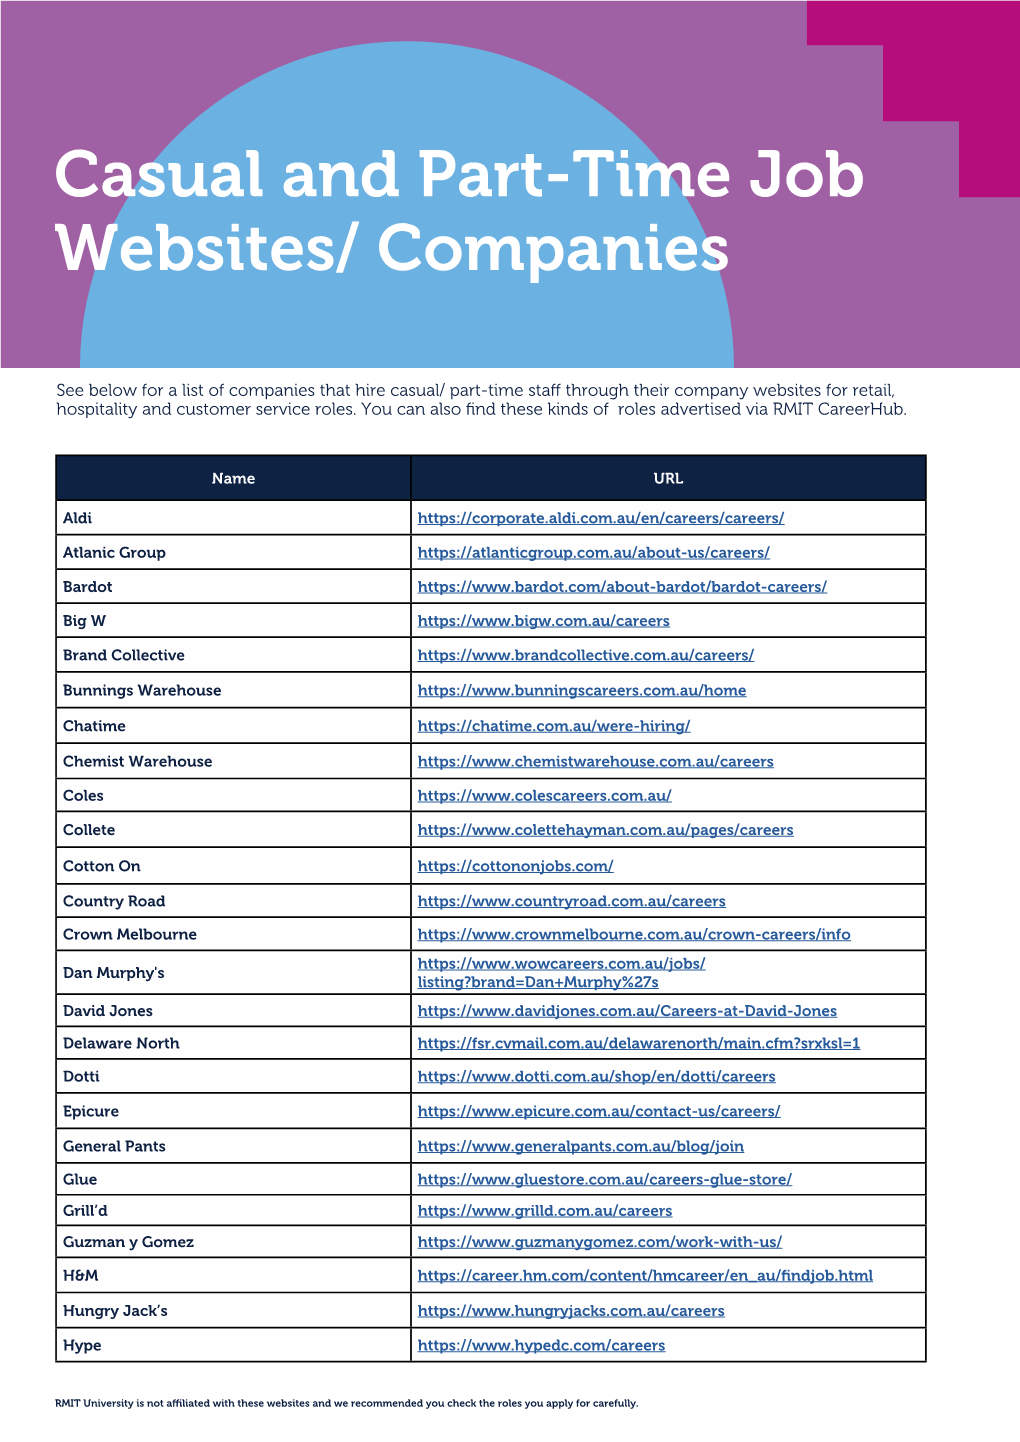 Casual and Part-Time Job Websites/ Companies